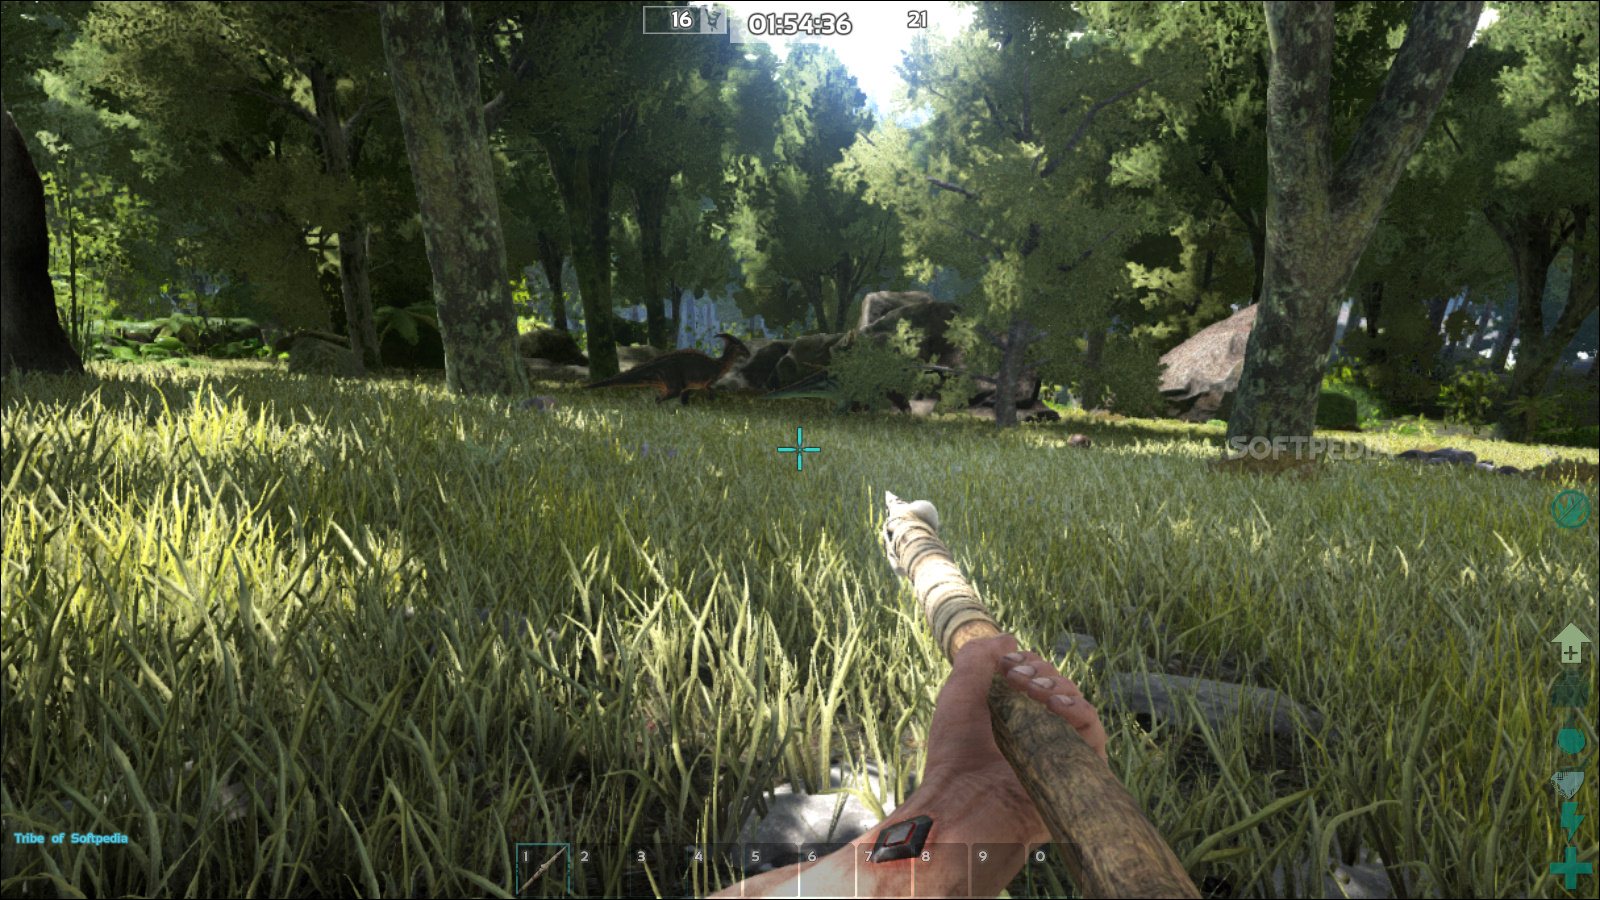 download ark survival of the fittest